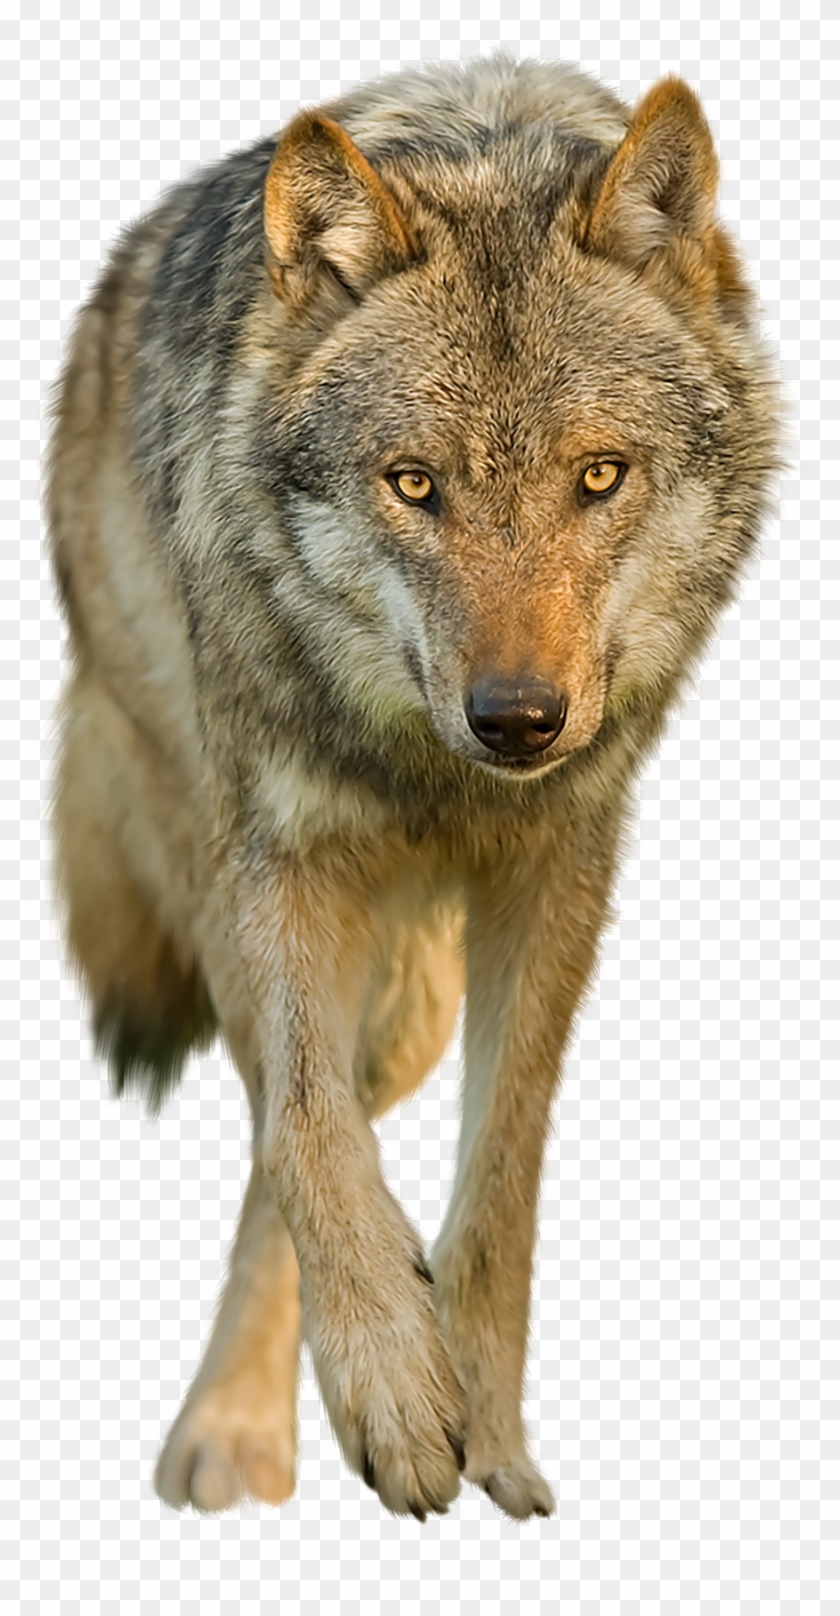 Wolves With Transparent Backgrounds - Transparent Background Wolves Png Clipart #367694